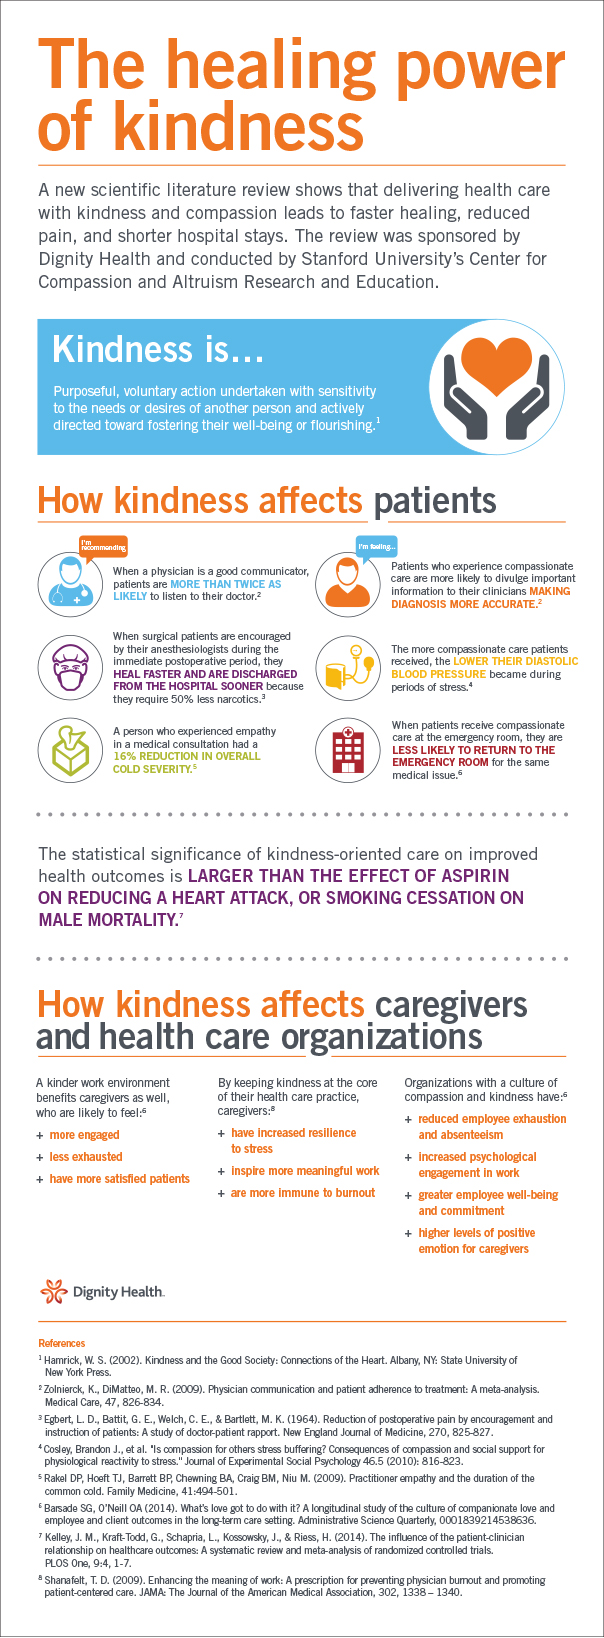 2014-11-13-CCARE_infographic_Final_2.jpg